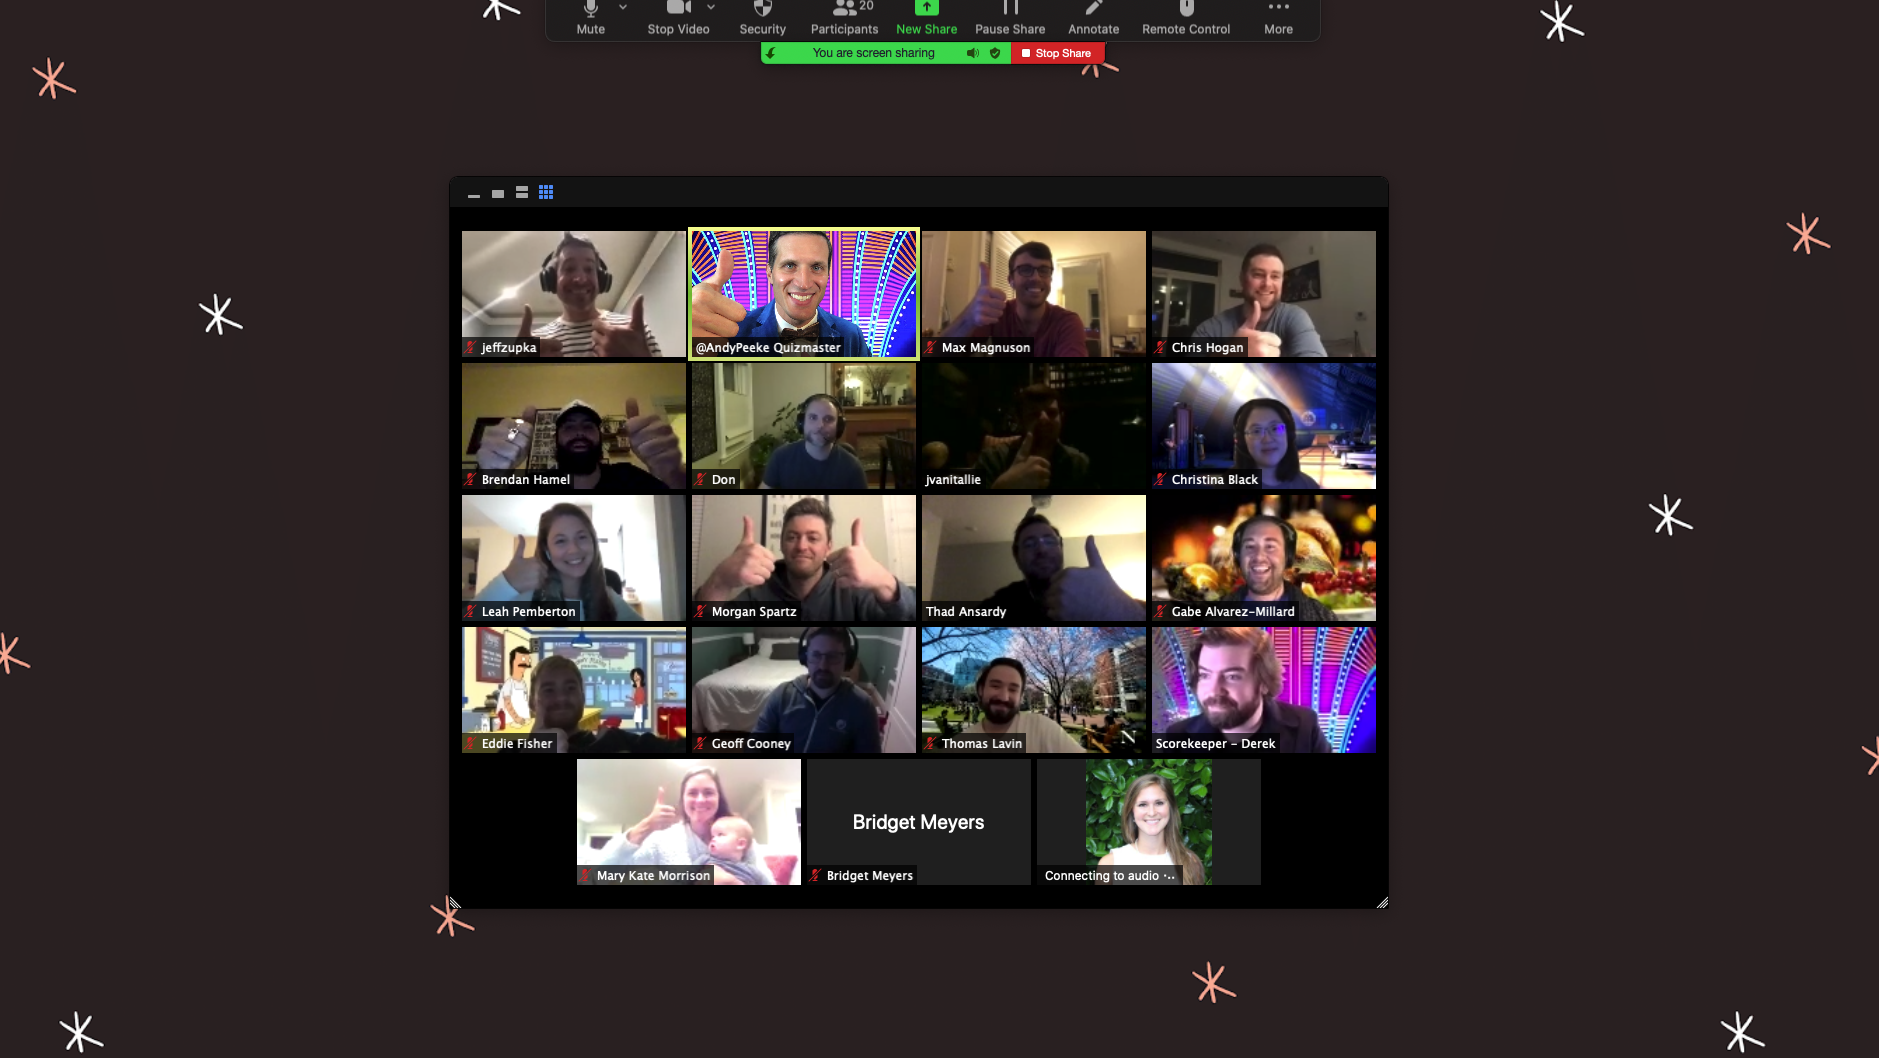 A screenshot of a zoom meeting with 19 participants.